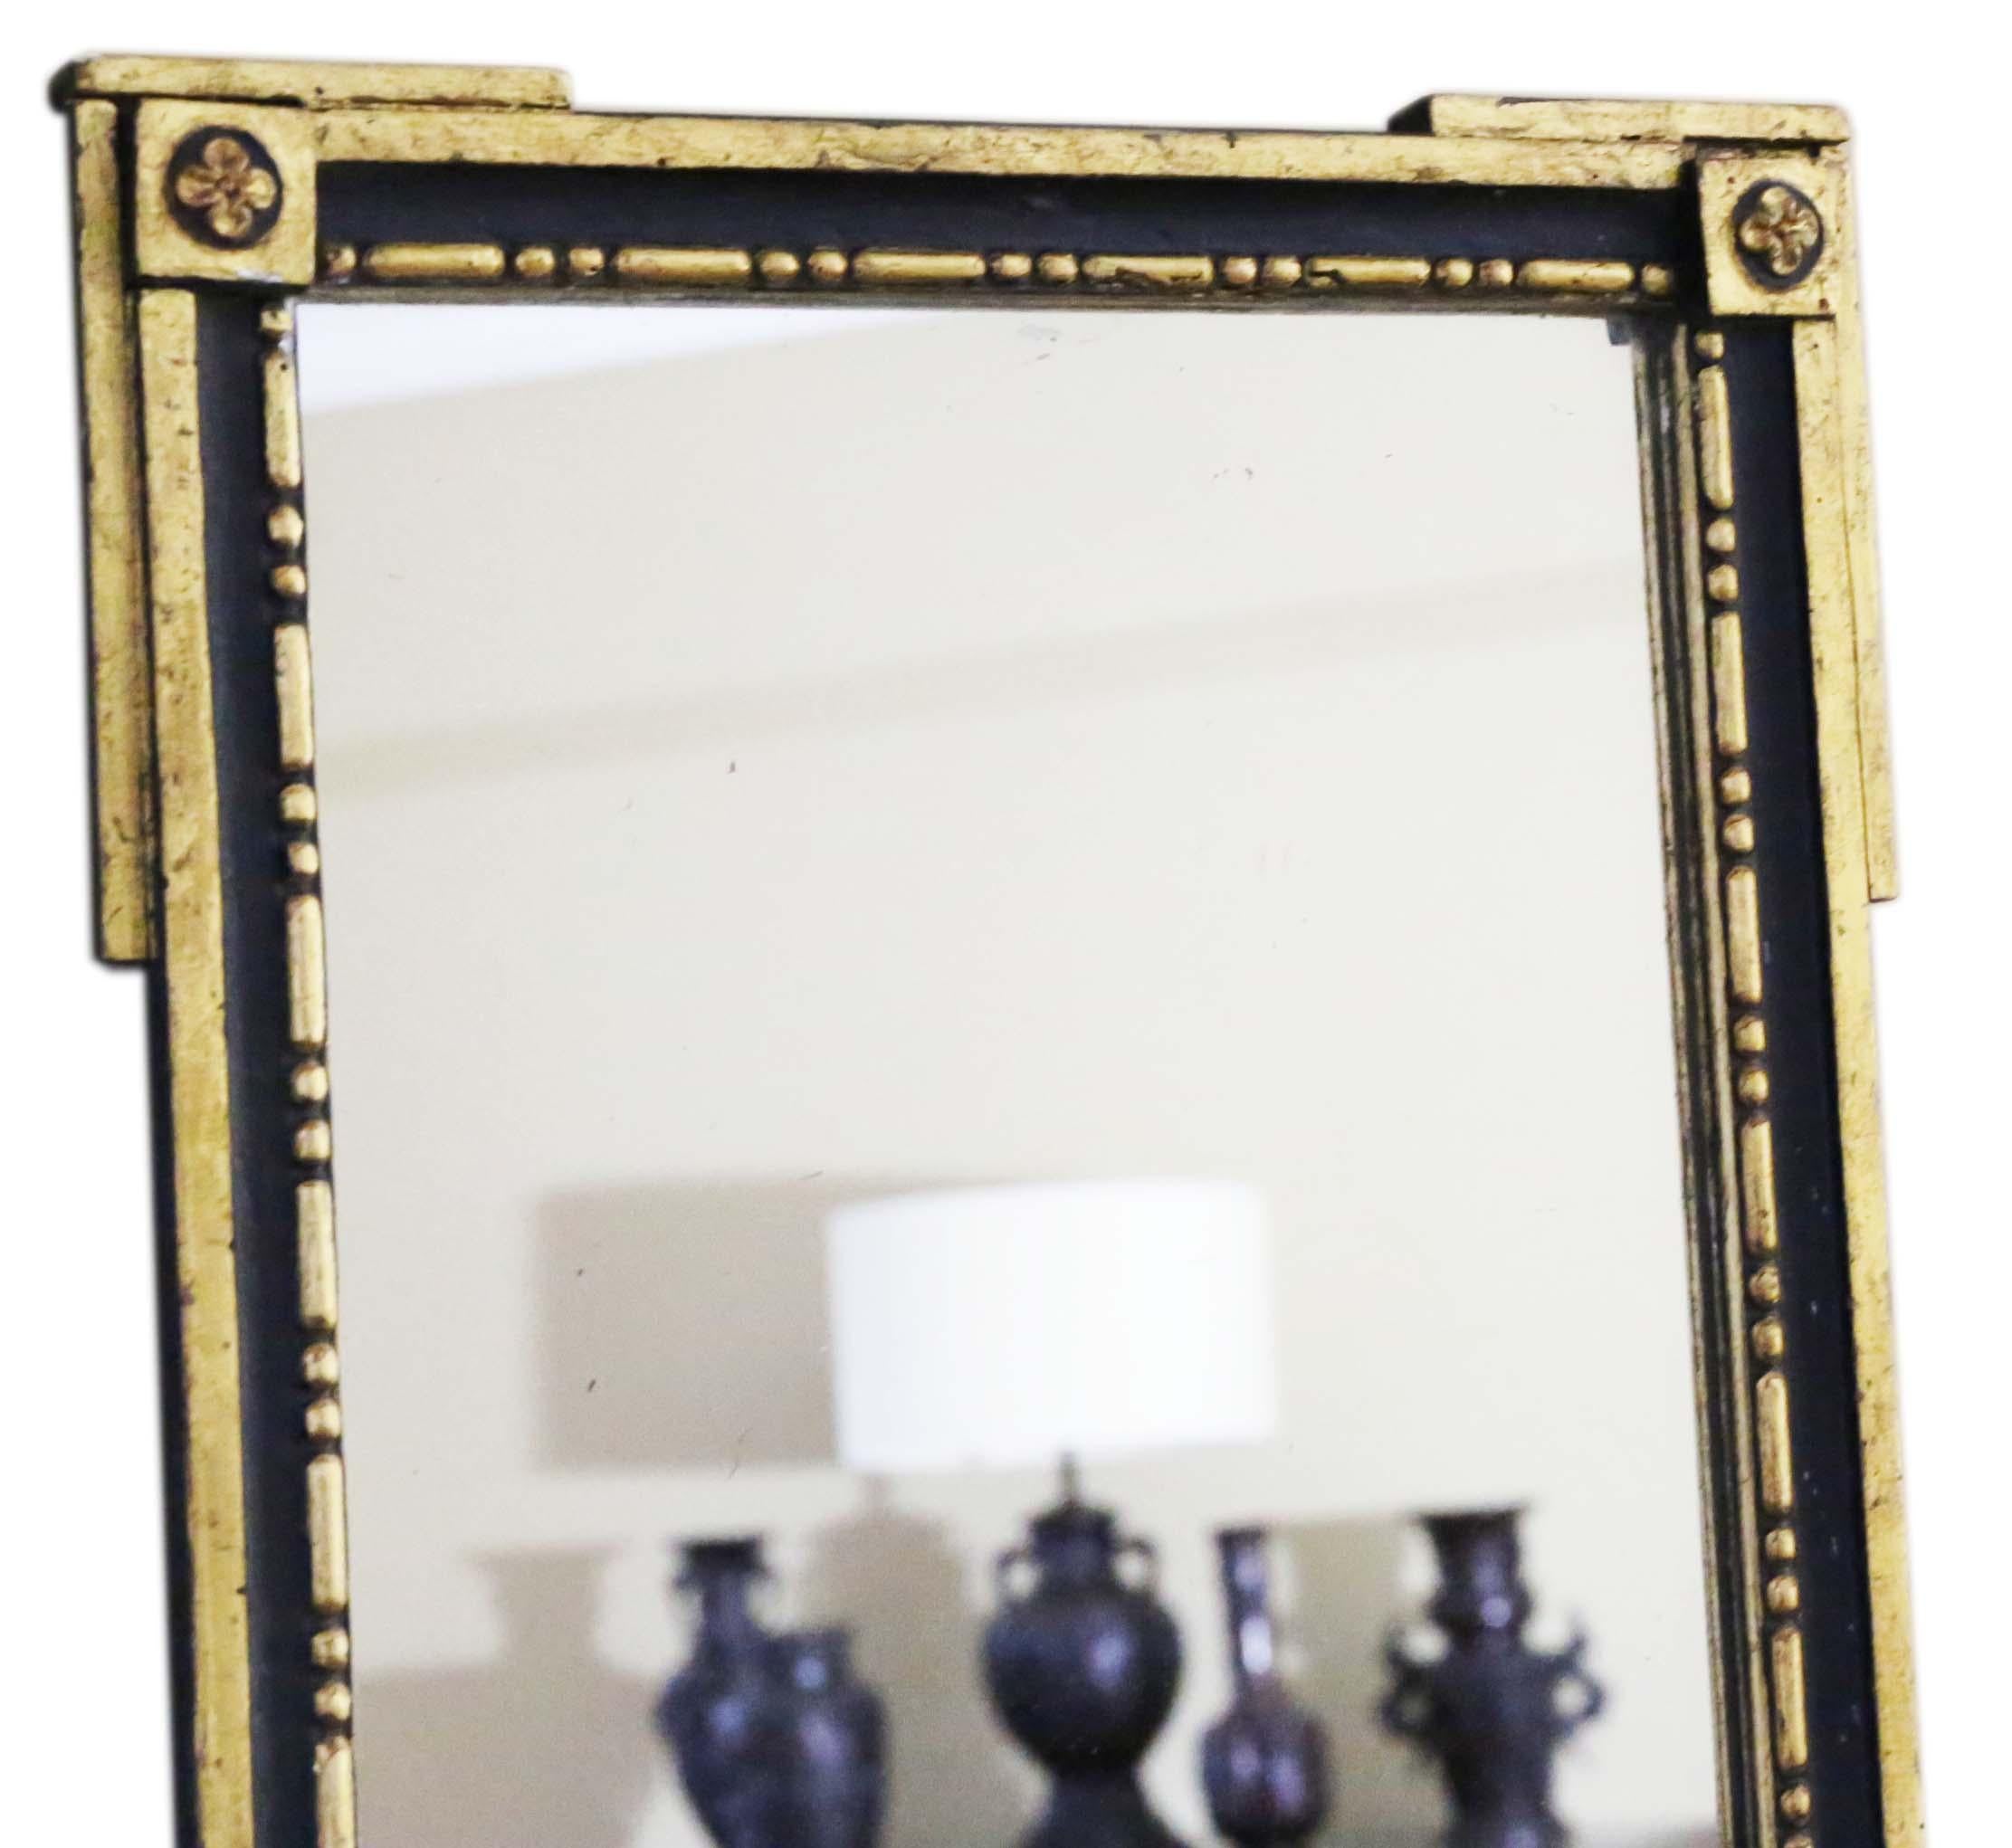 Antique rare fine quality early 19th Century Georgian gilt overmantle or wall mirror.

The mirror has it's original back. Some refinishing and touching up to the frame, but this has been done sympathetically.

No loose joints or woodworm.

The